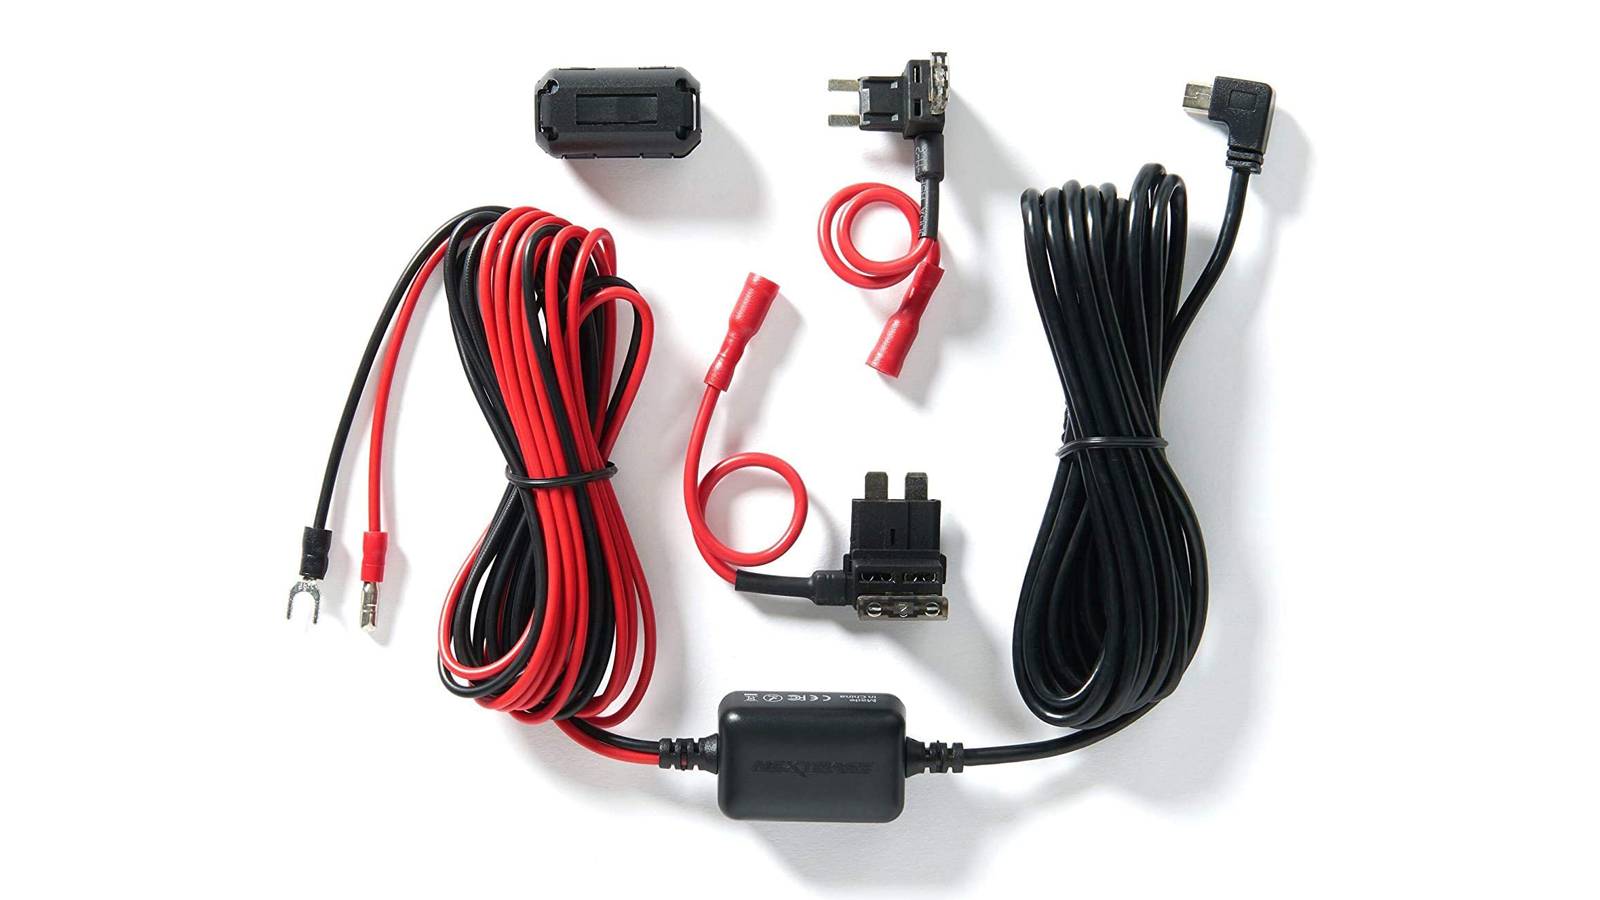 A Nextbase wiring cable kit for dash cams